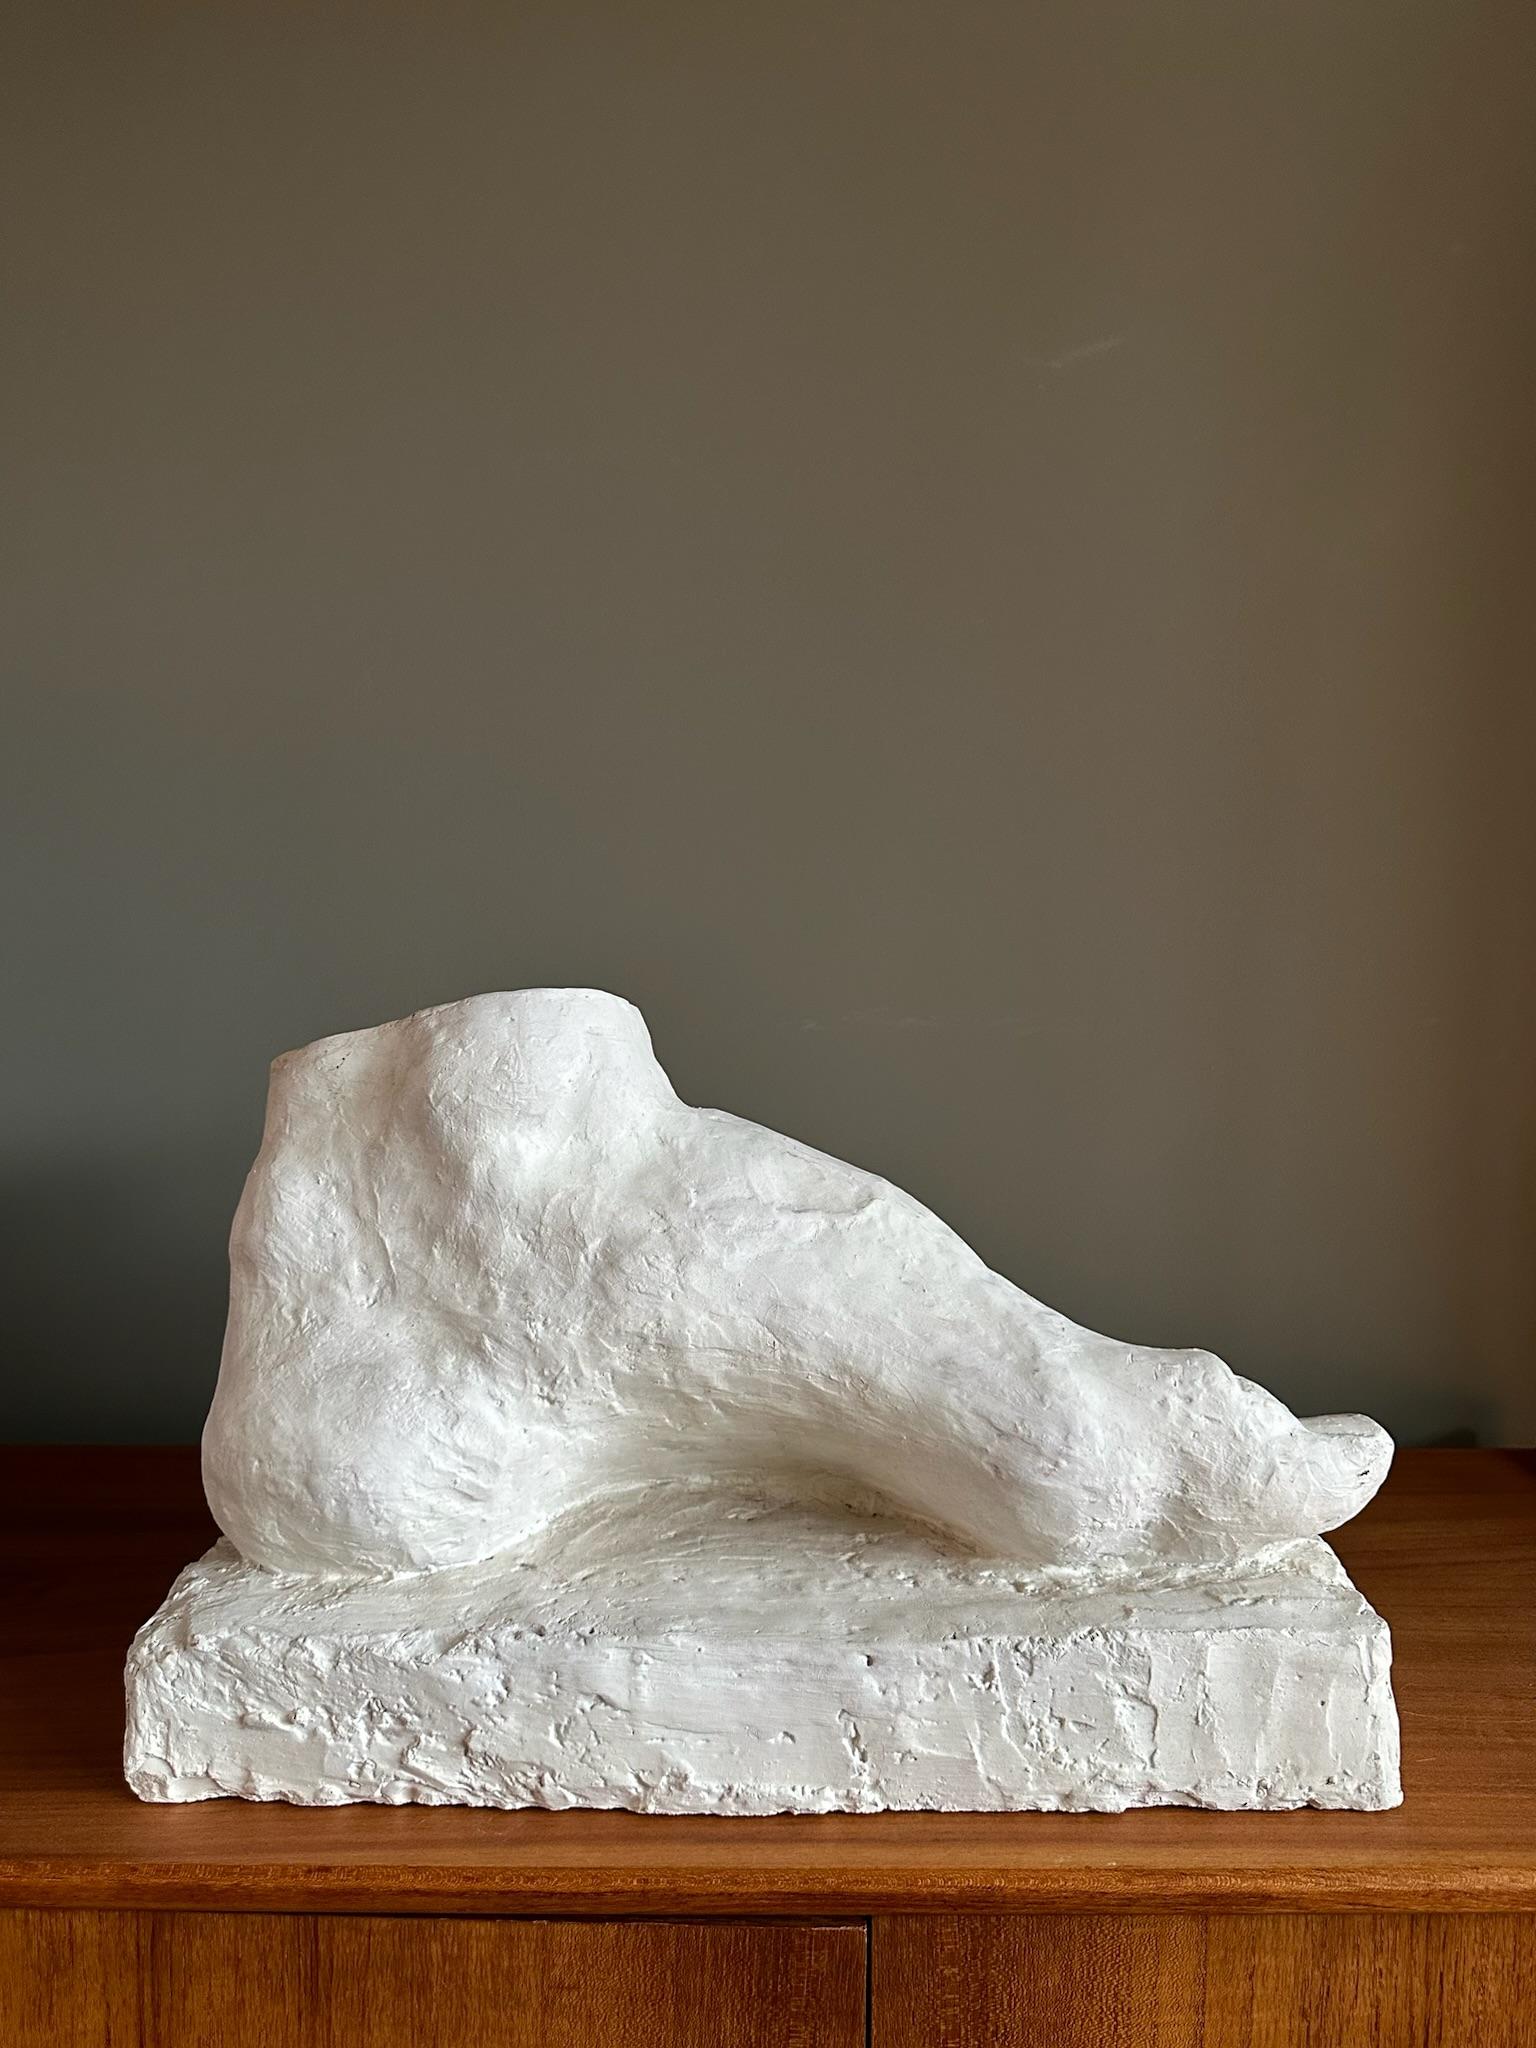 Very big foot, cast, made out of plaster.
This one is made around 1900. 
At Art colleges students learn to drawn with these plaster casts. 
Made in Belgium.

Now it's a beautiful piece of art that will be great in your interior design.

The size is